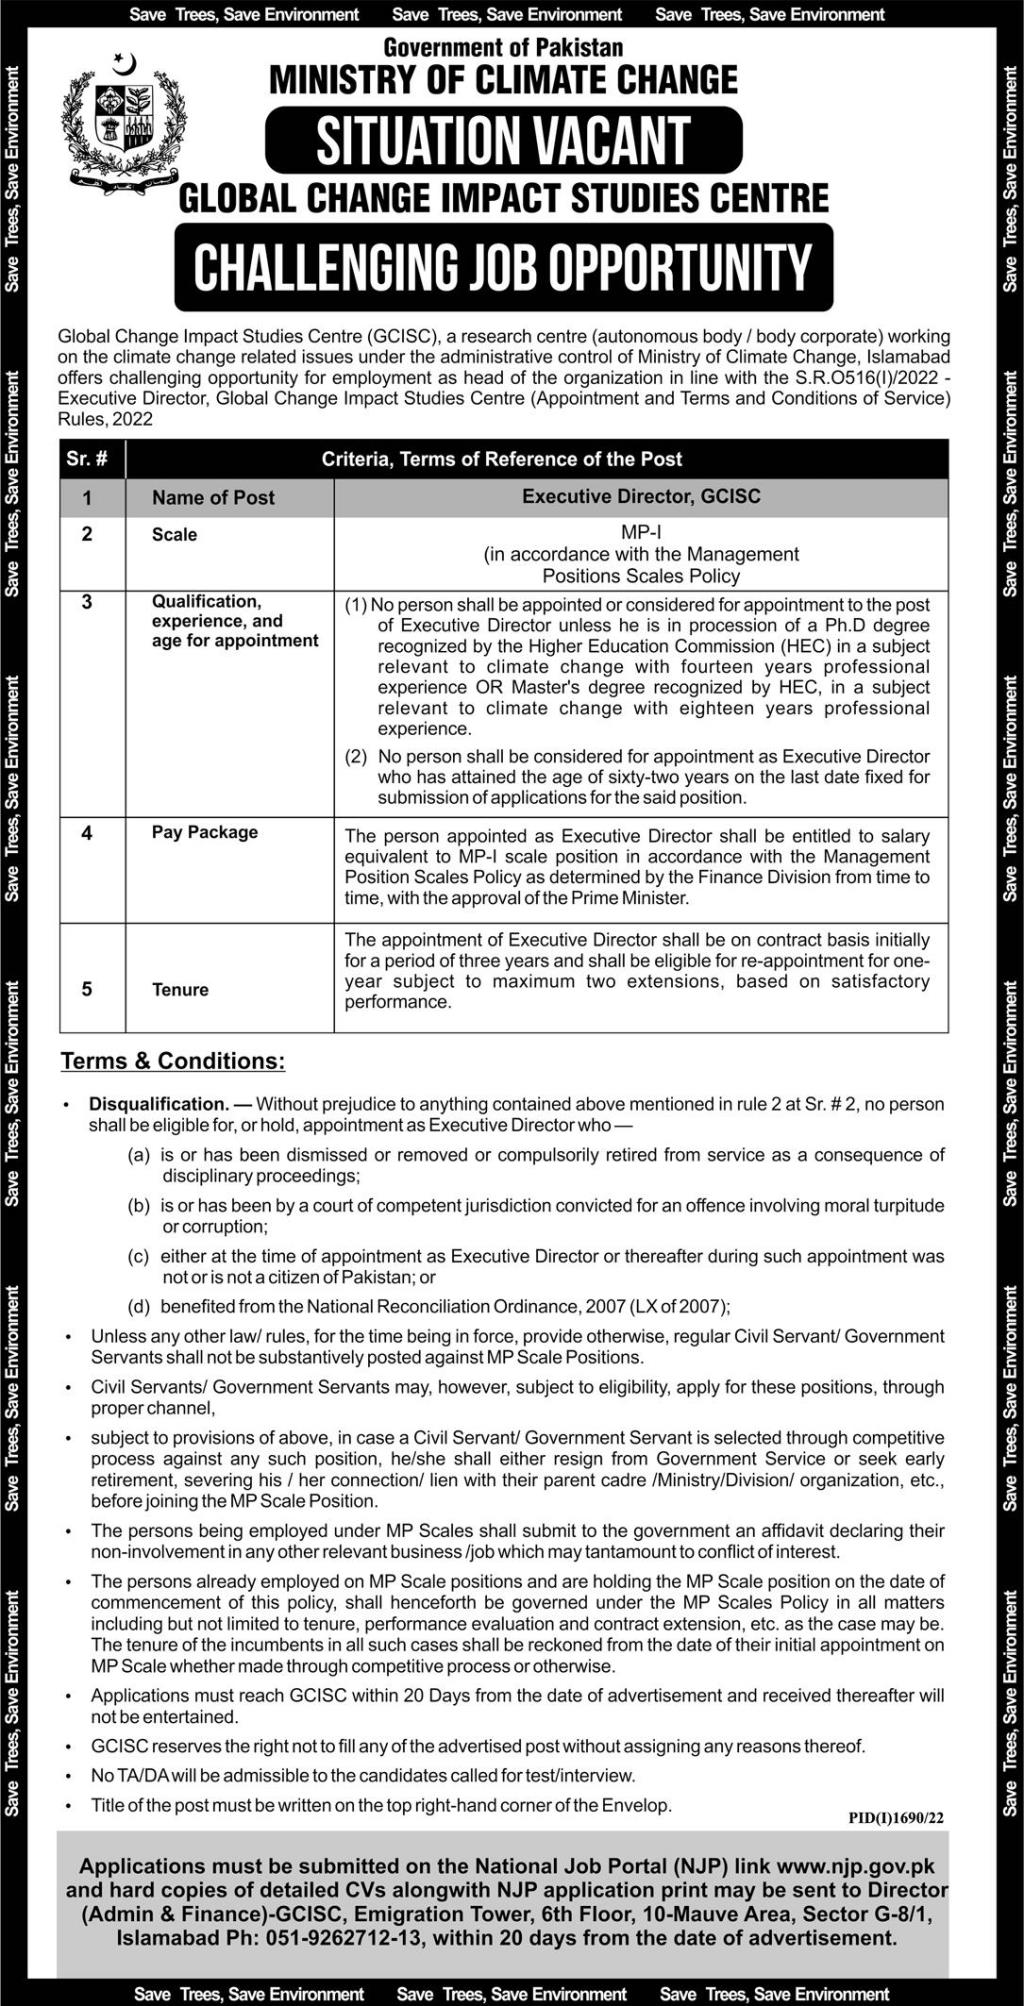 Ministry of Climate Change(MOCC) Jobs 2022